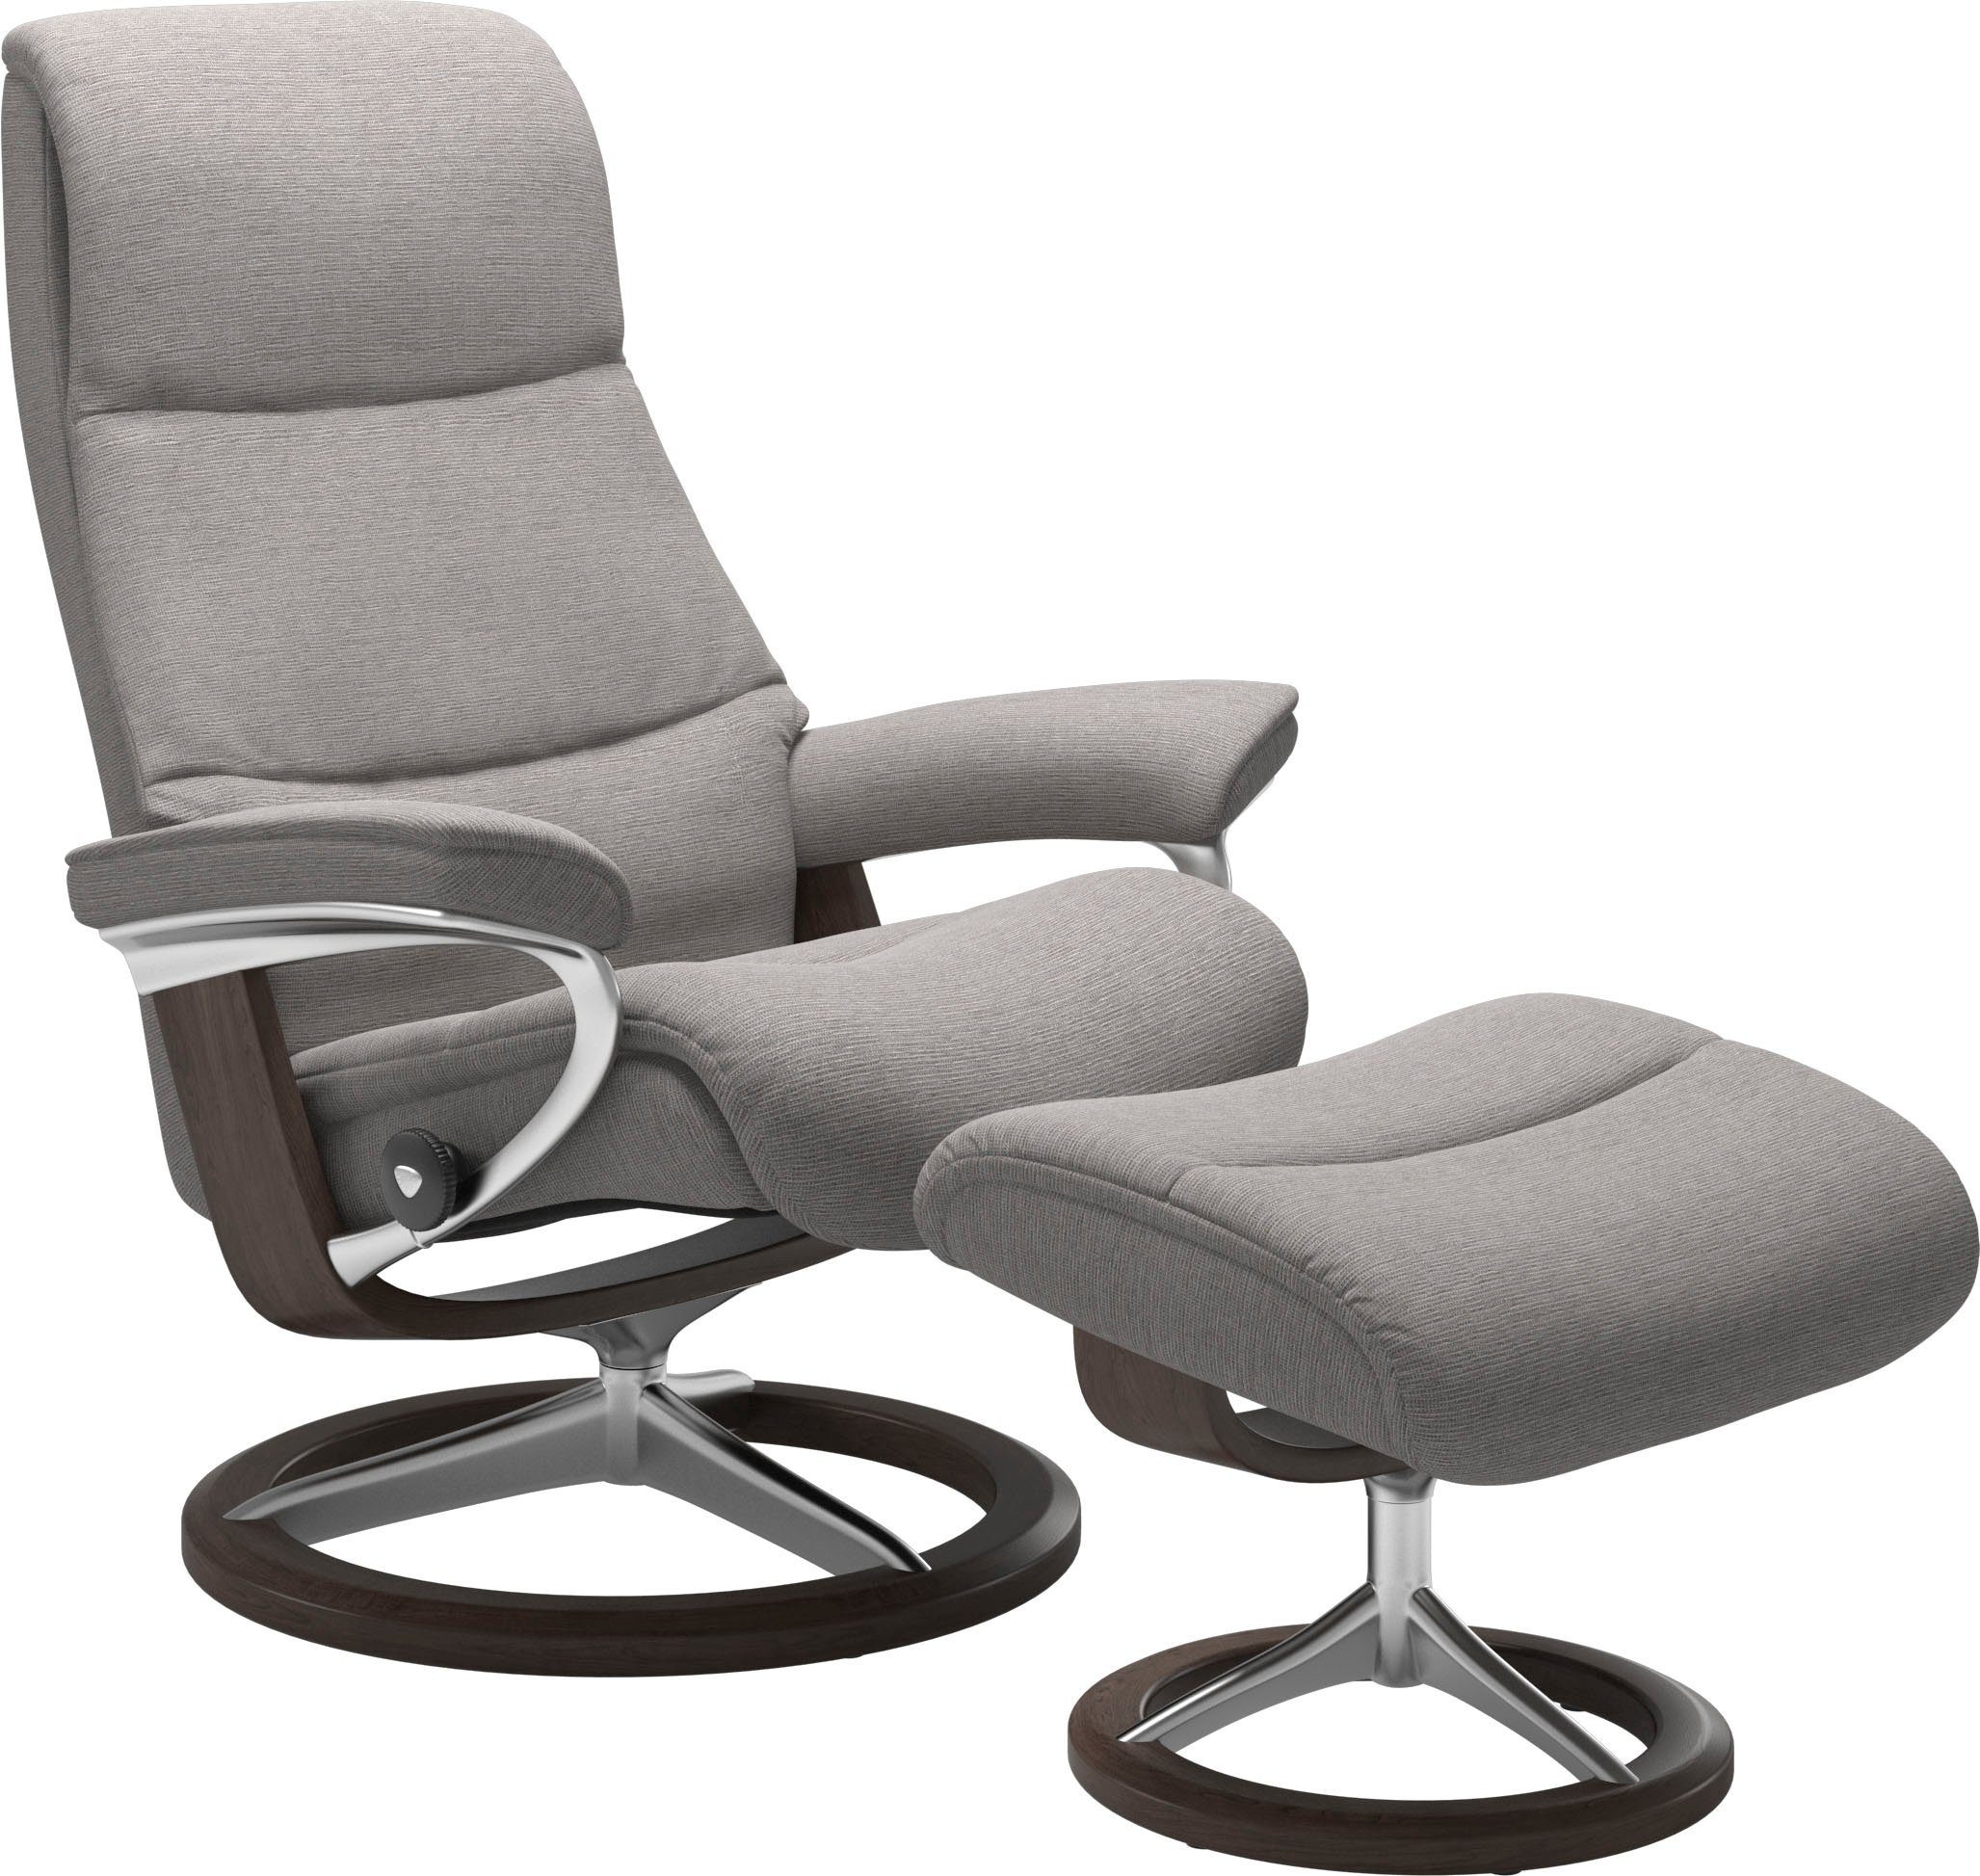 View, Größe mit Wenge Base, Signature Stressless® Relaxsessel S,Gestell